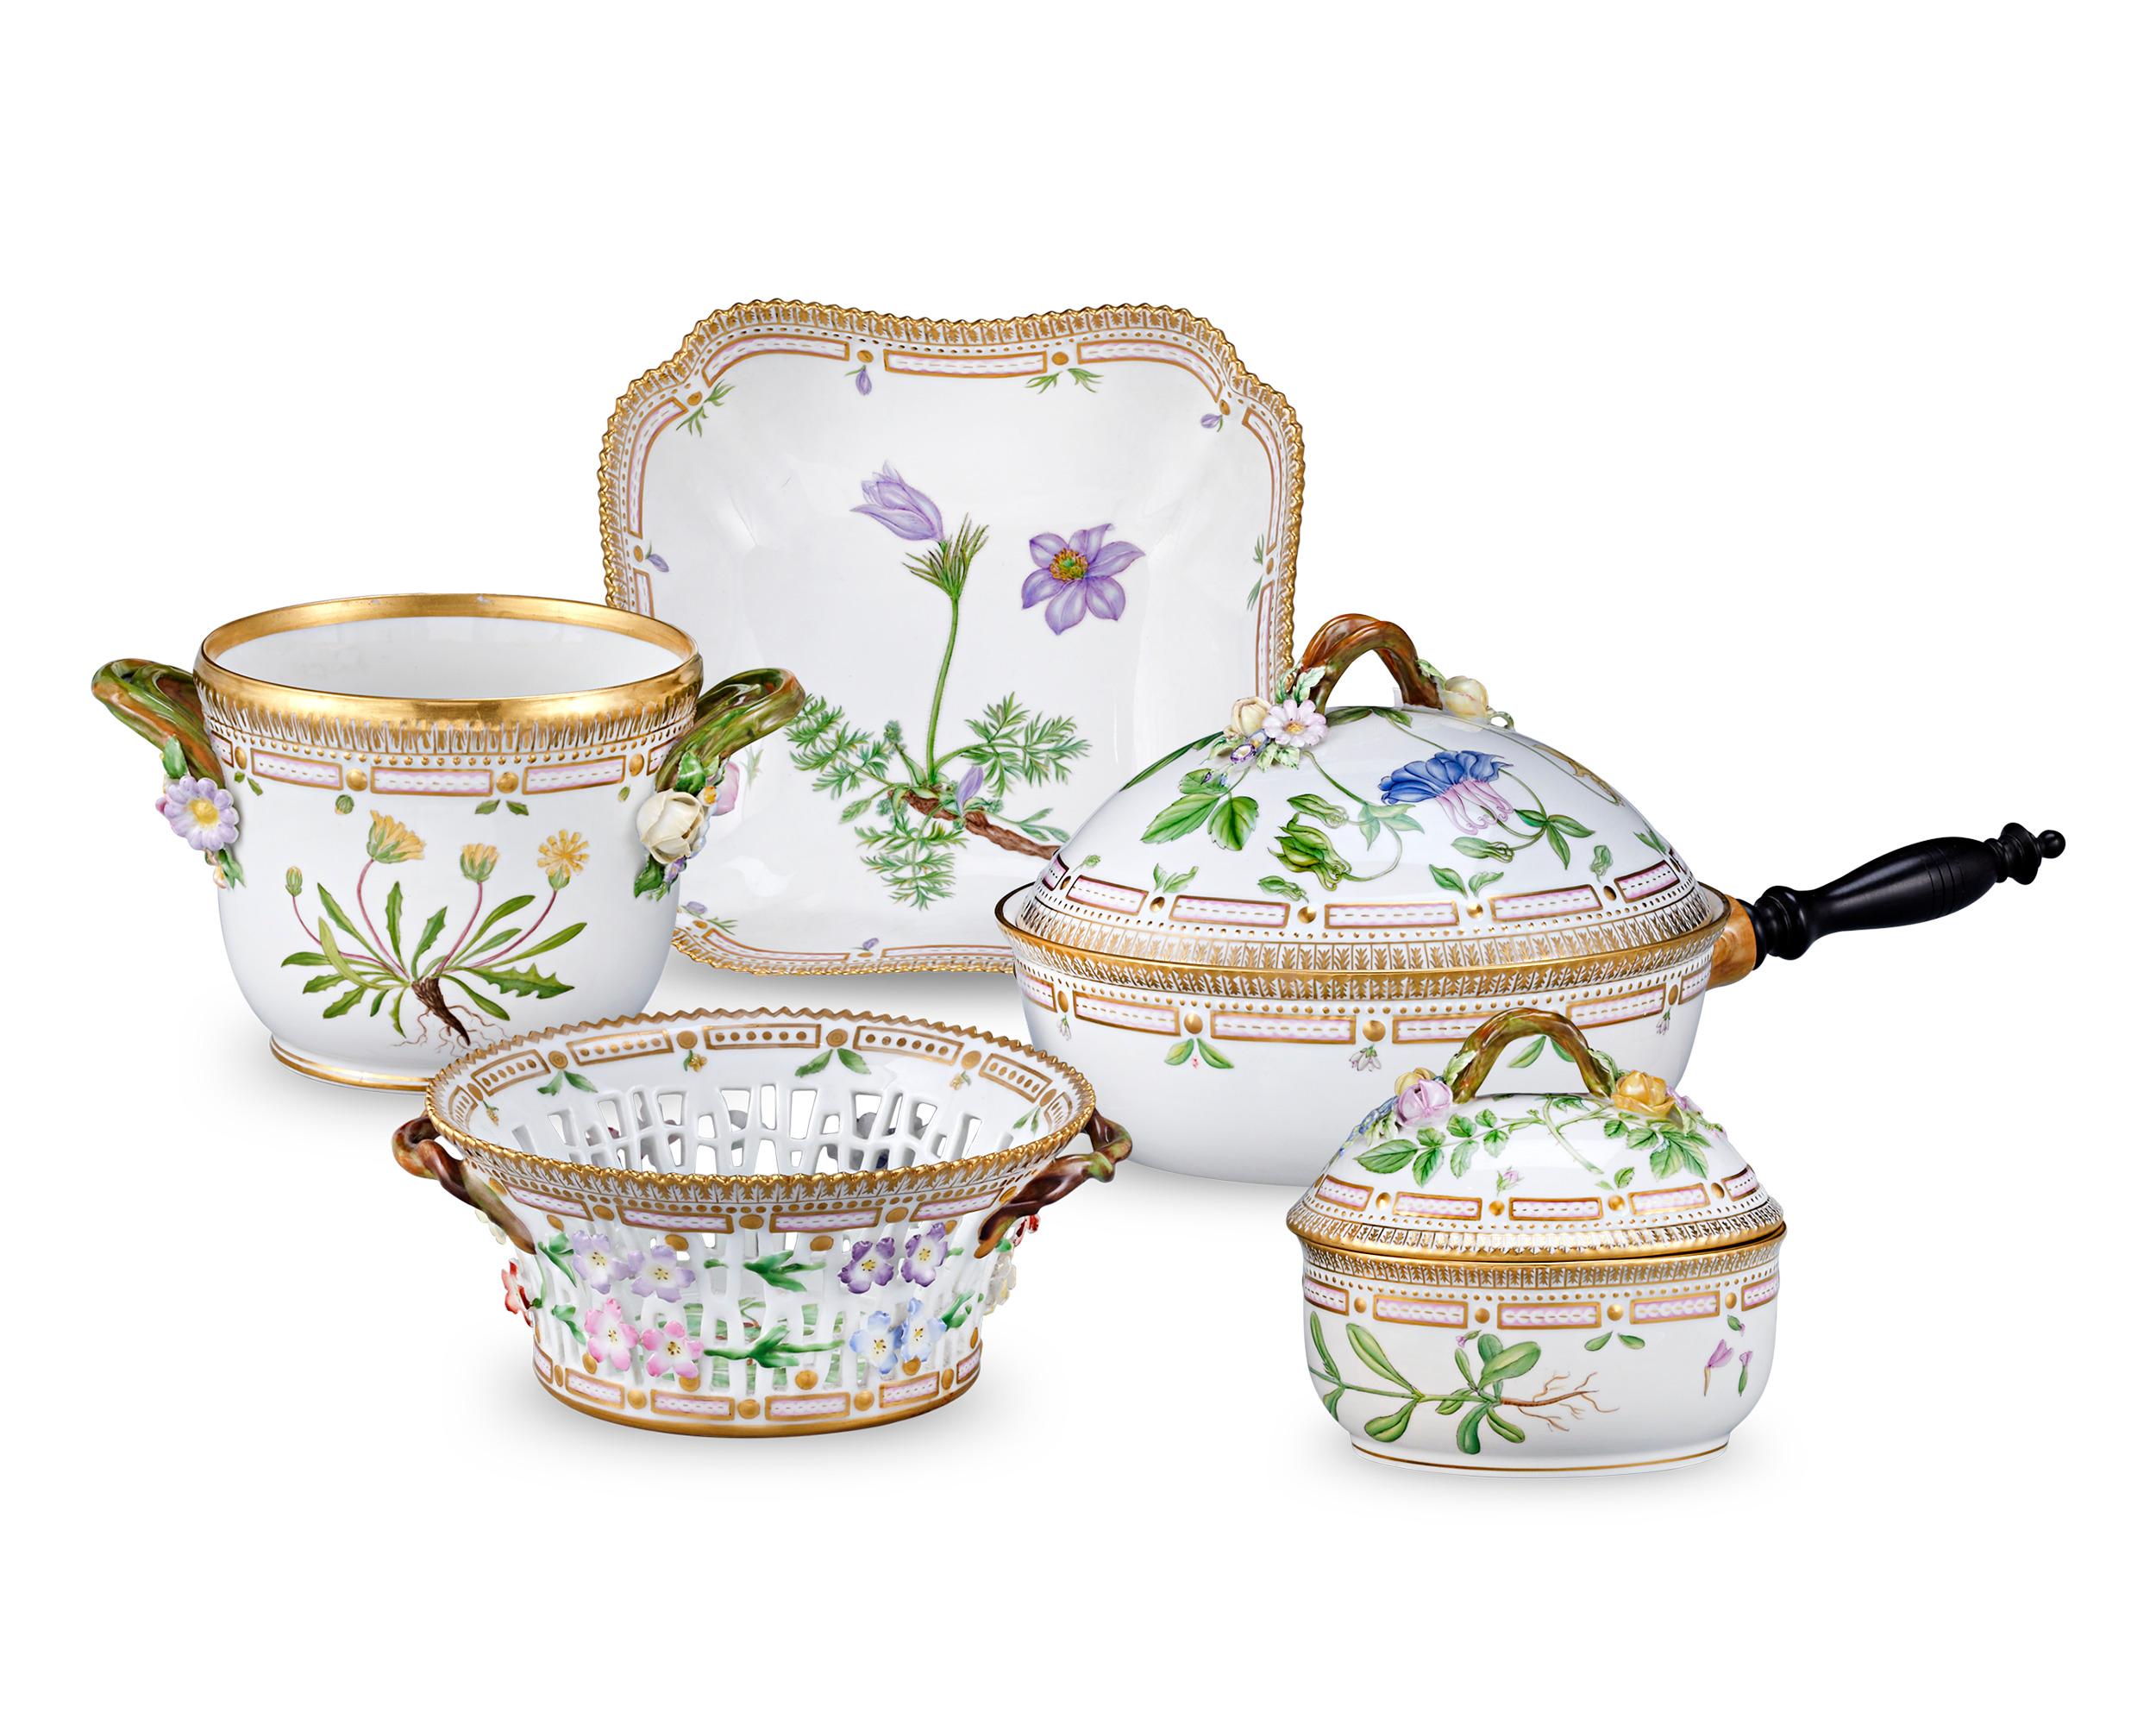 Crafted by the Royal Copenhagen Porcelain Manufactory, this 75-piece dinner service features one of the most prestigious porcelain patterns ever produced — the coveted Flora Danica pattern. The service for 12 boasts rich, hand-painted botanical